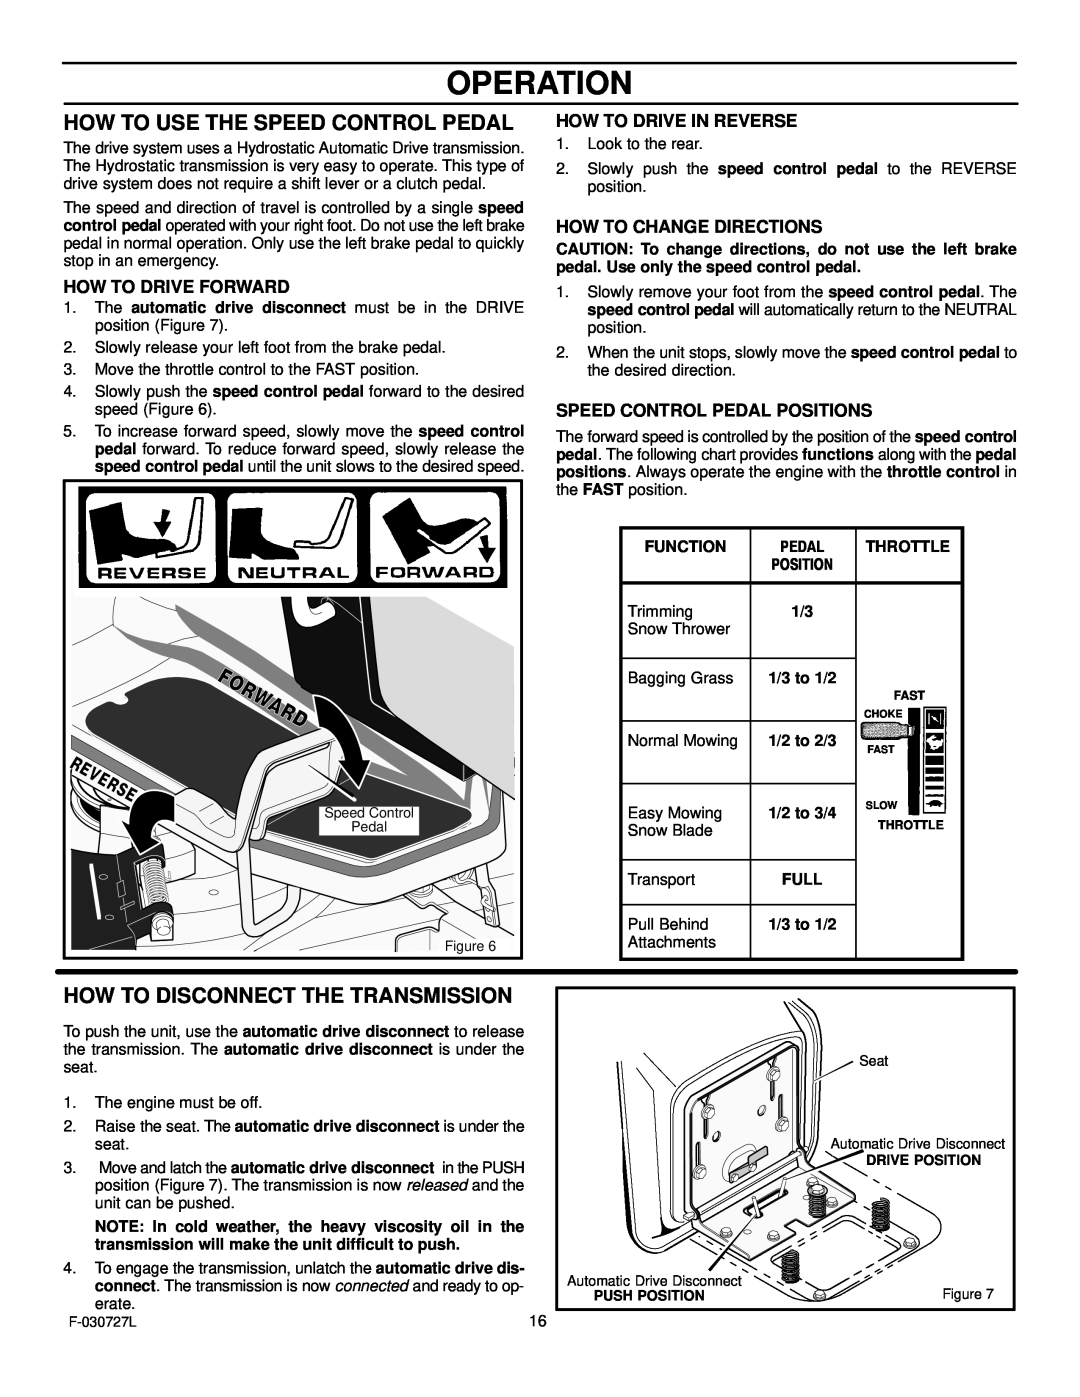 Murray 465600x8A Operation, How To Use The Speed Control Pedal, How To Disconnect The Transmission, How To Drive Forward 